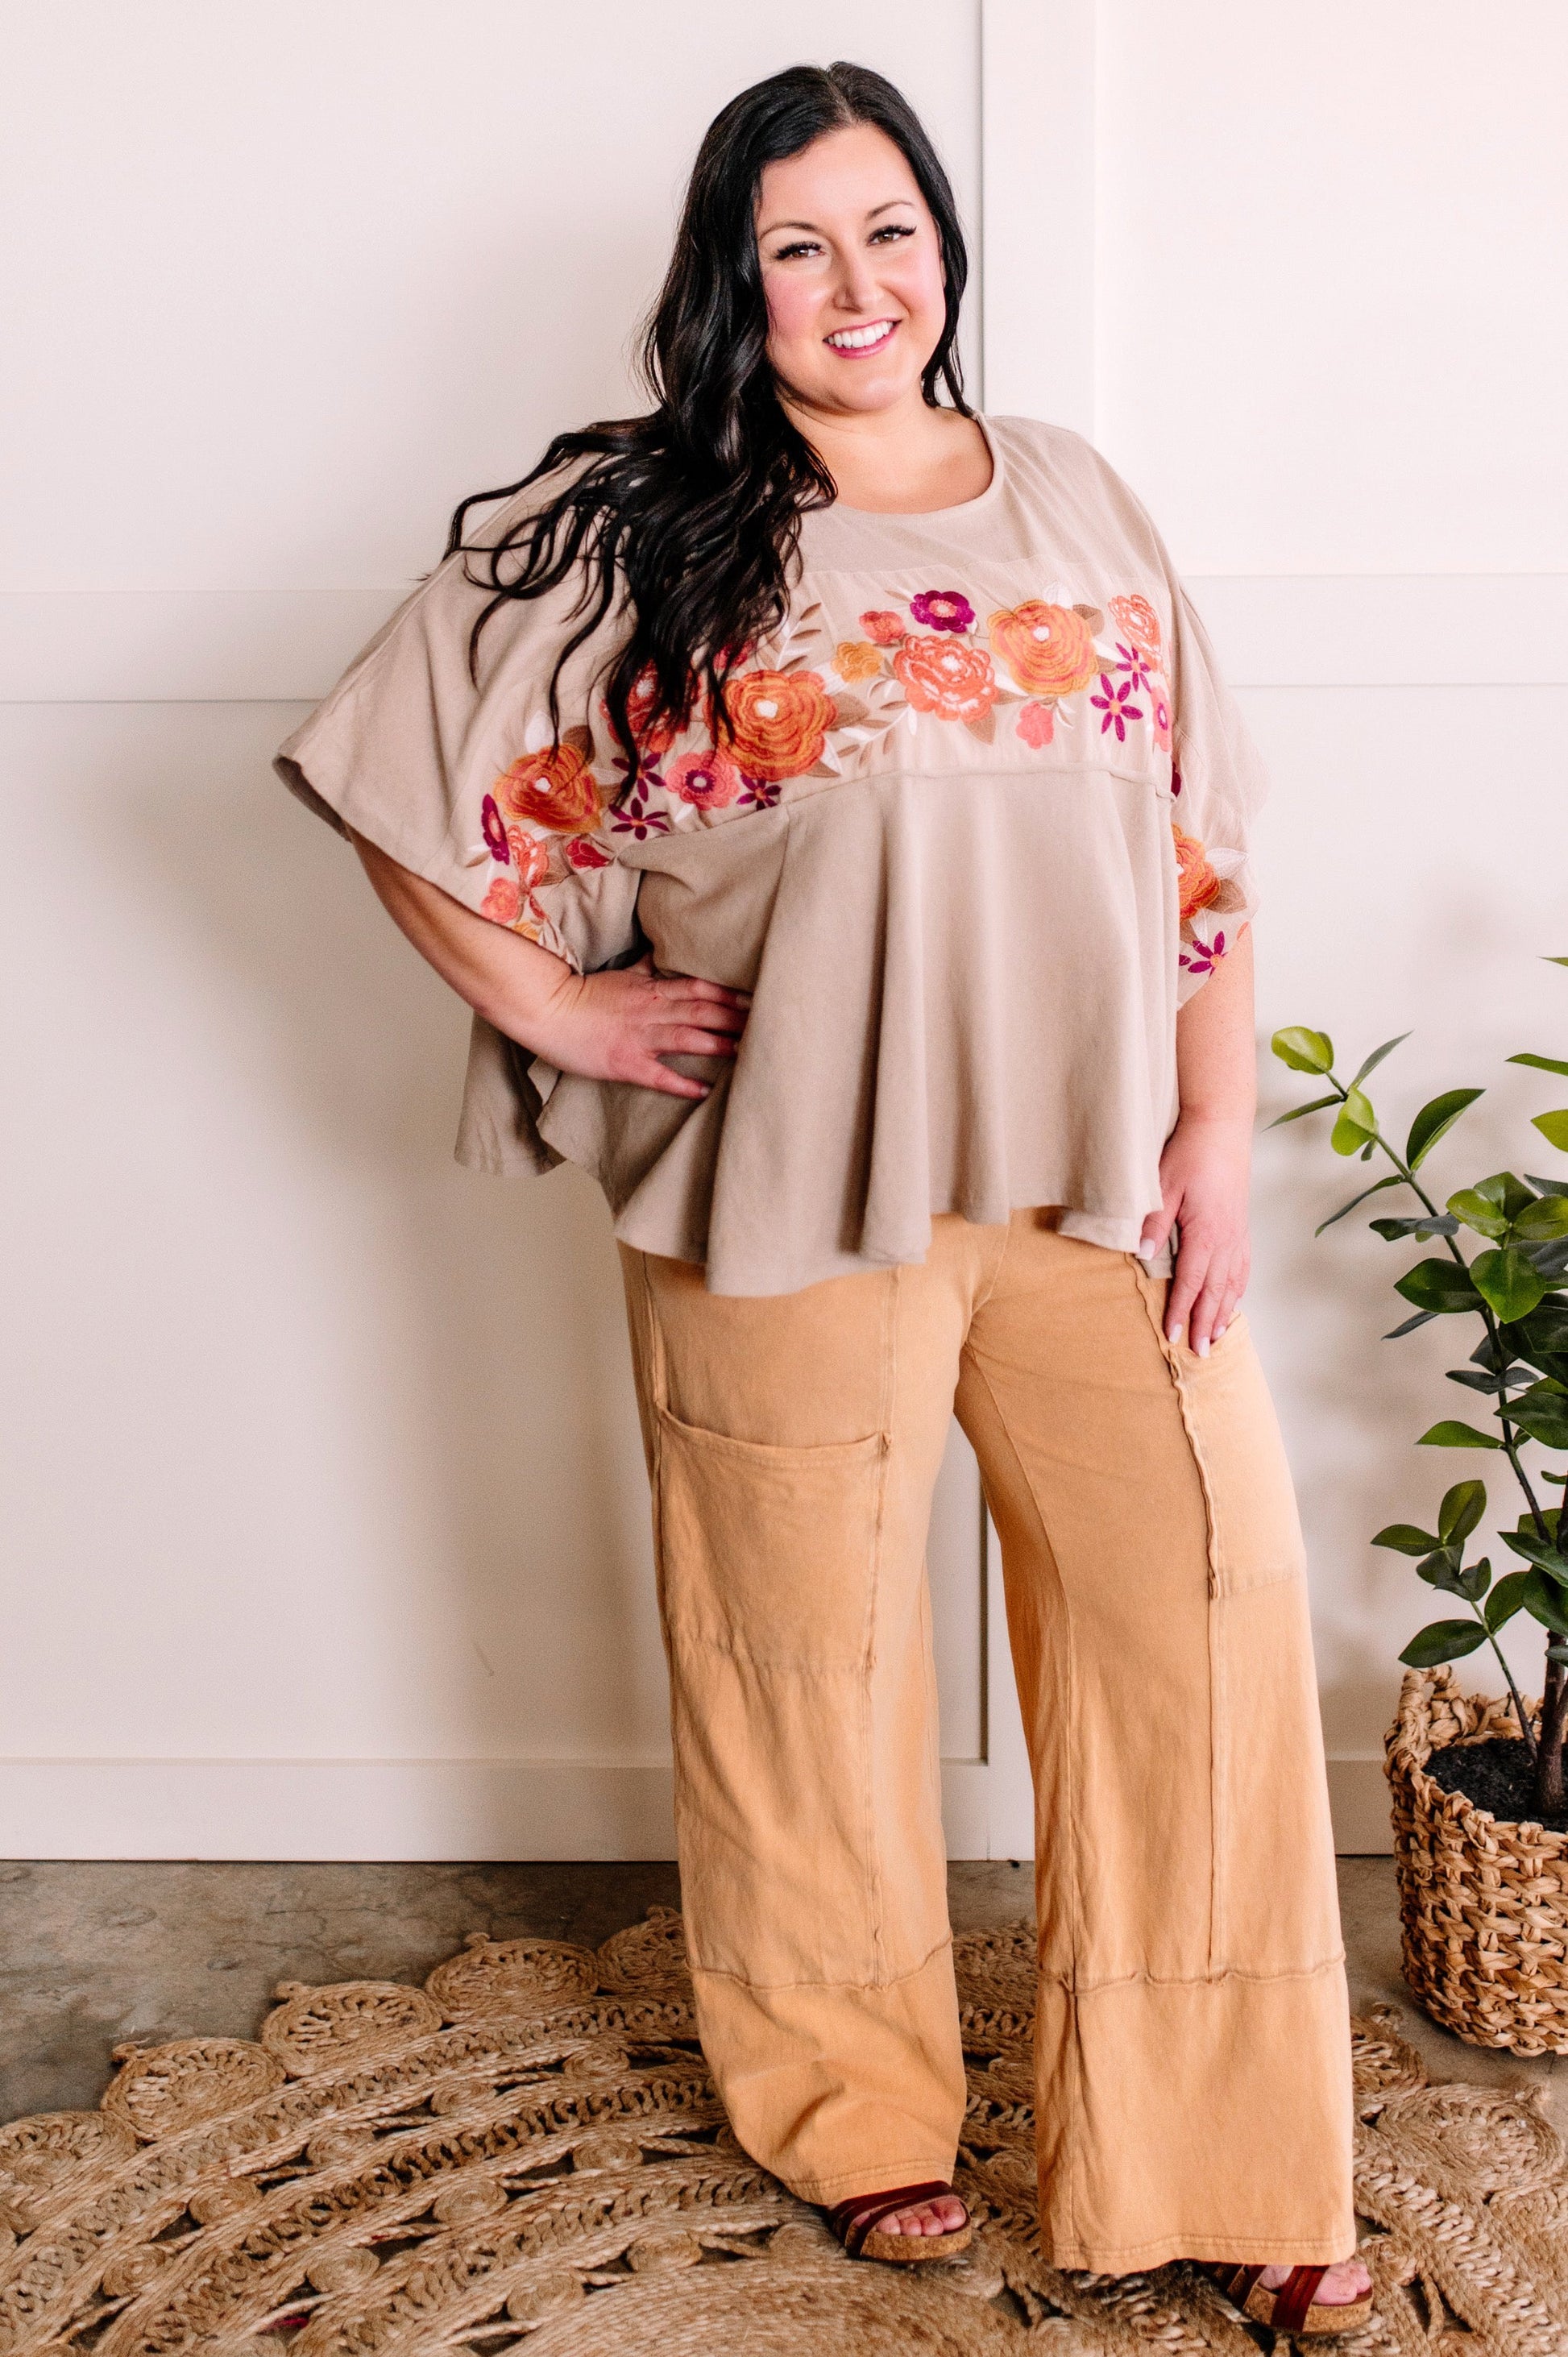 1.15 Savanna Jane Bold Embroidered Floral Top In Natural Dahlia American Boutique Drop Ship